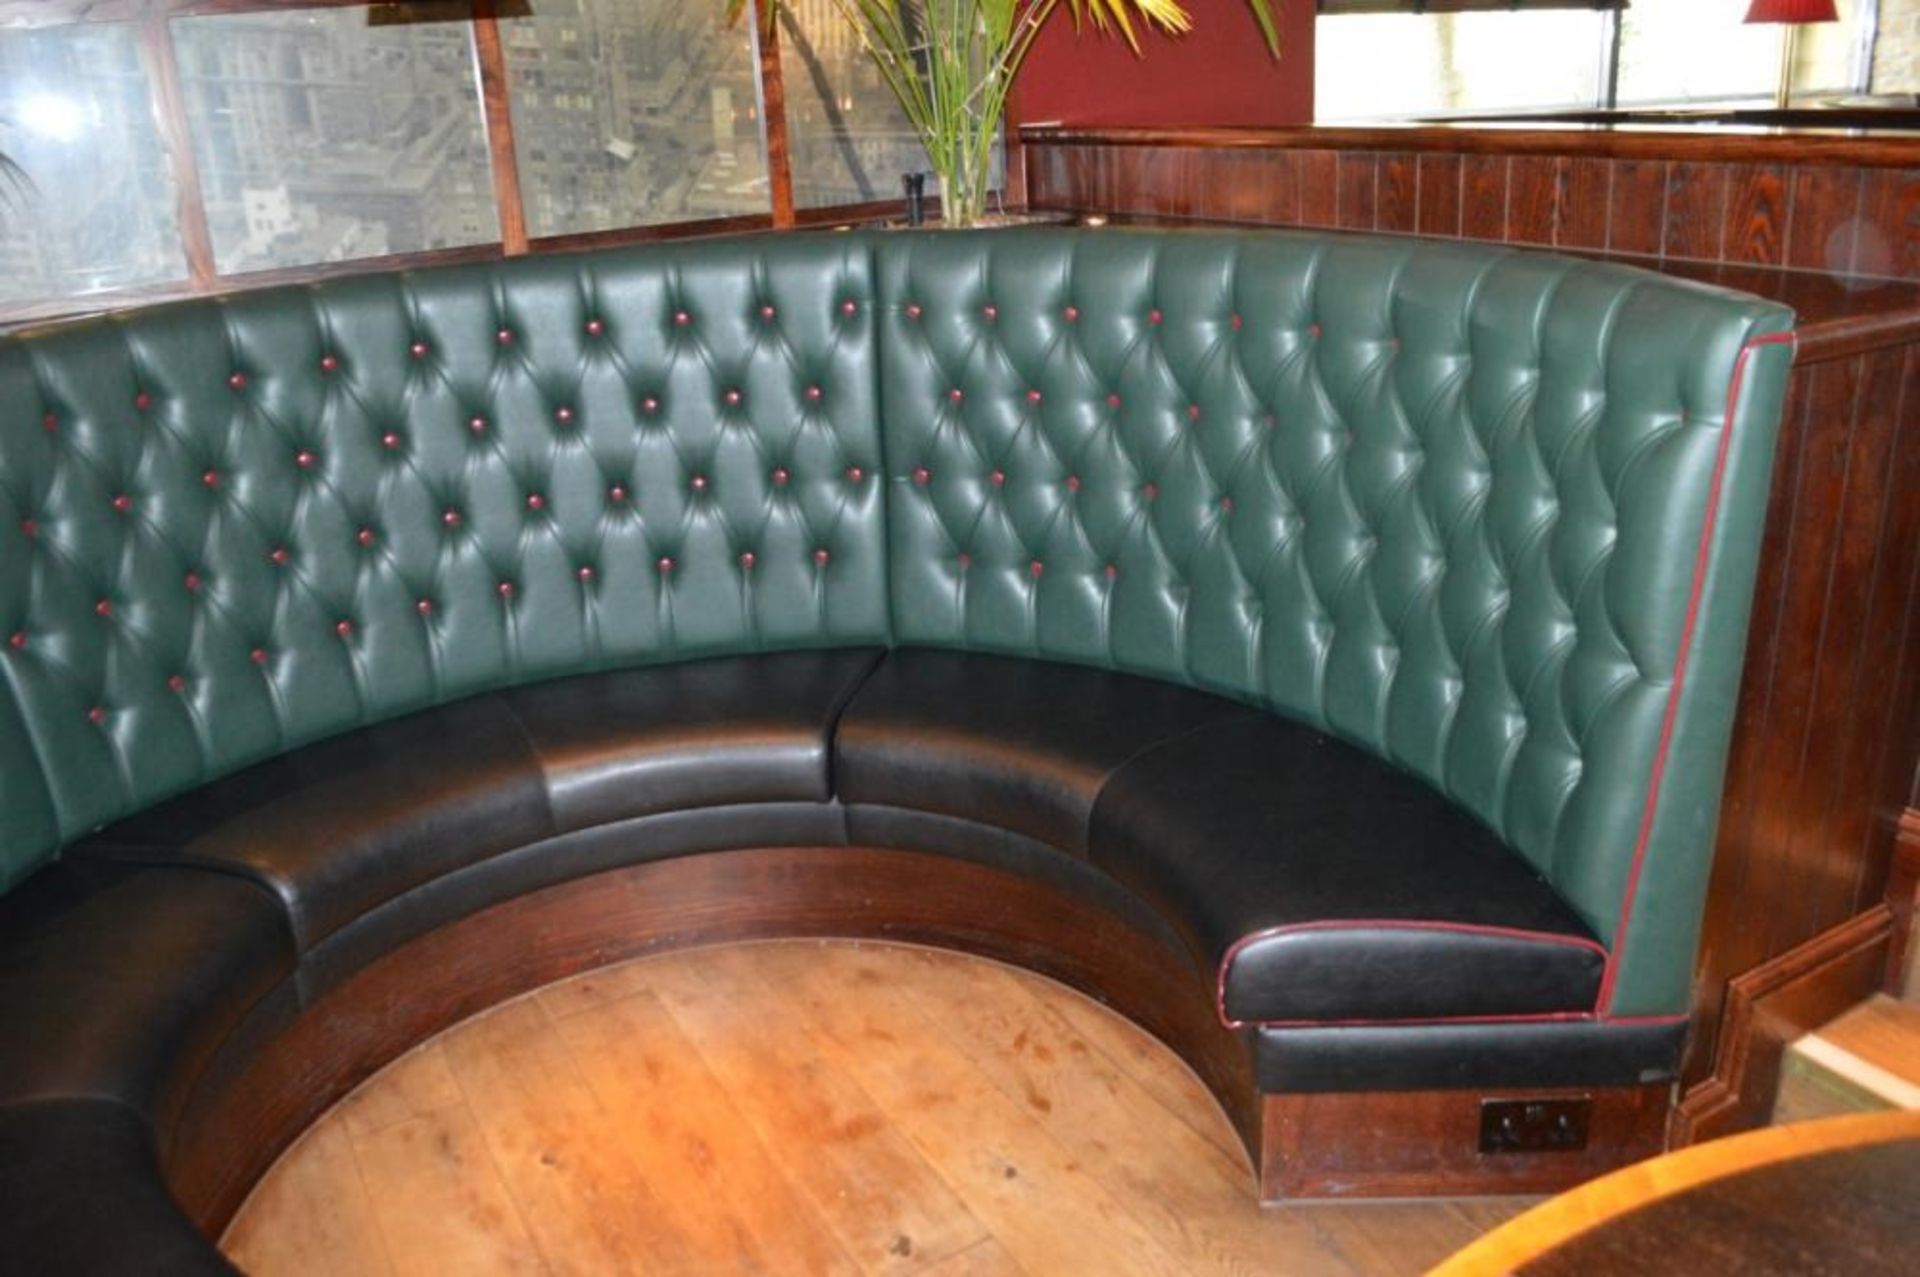 1 x Contemporary U Shape Seating Booth - Features a Leather Upholstery With Green Studded Backrests, - Image 5 of 10